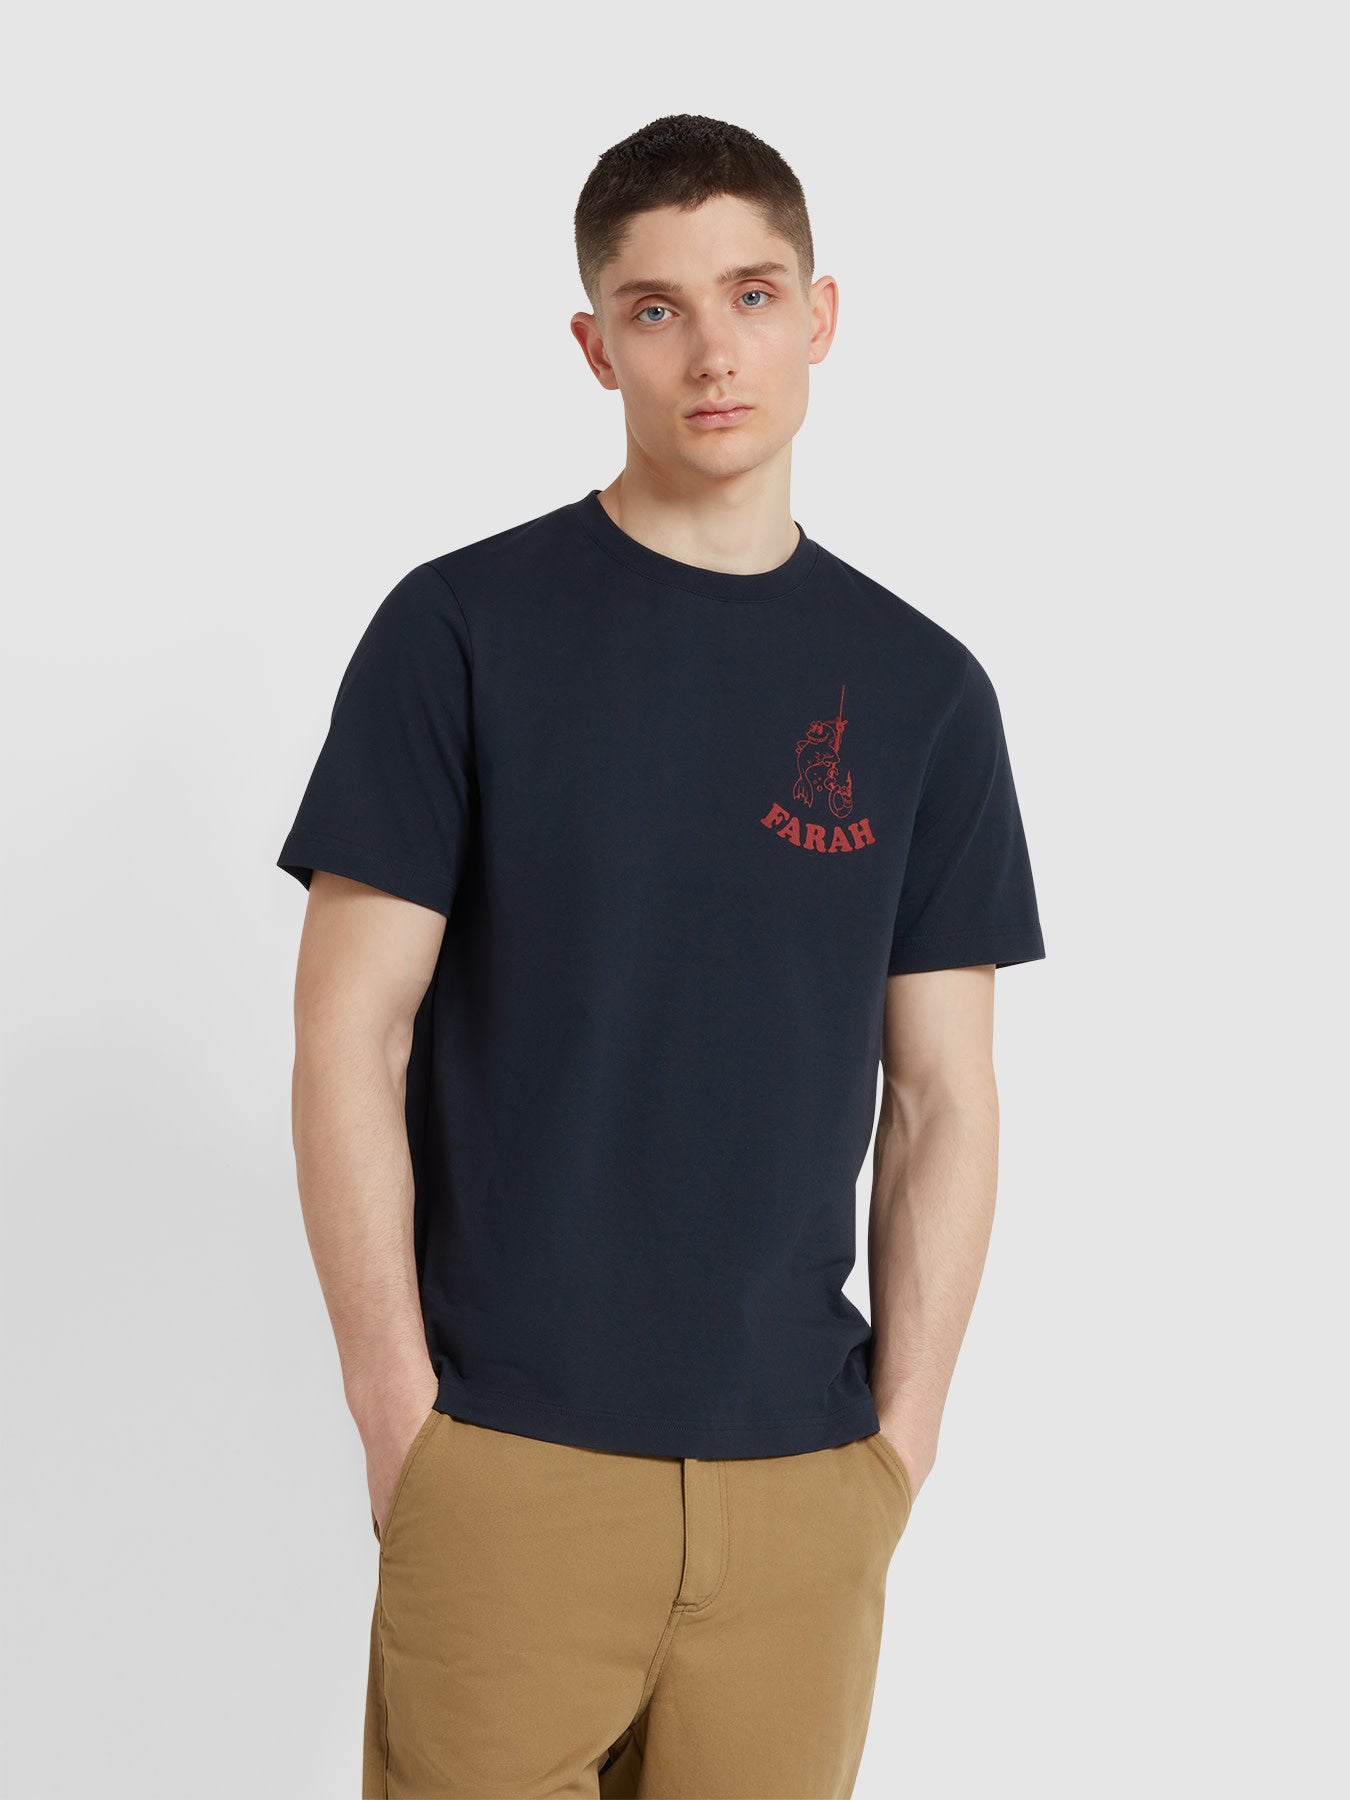 View Stockwell Regular Fit Graphic TShirt In True Navy information